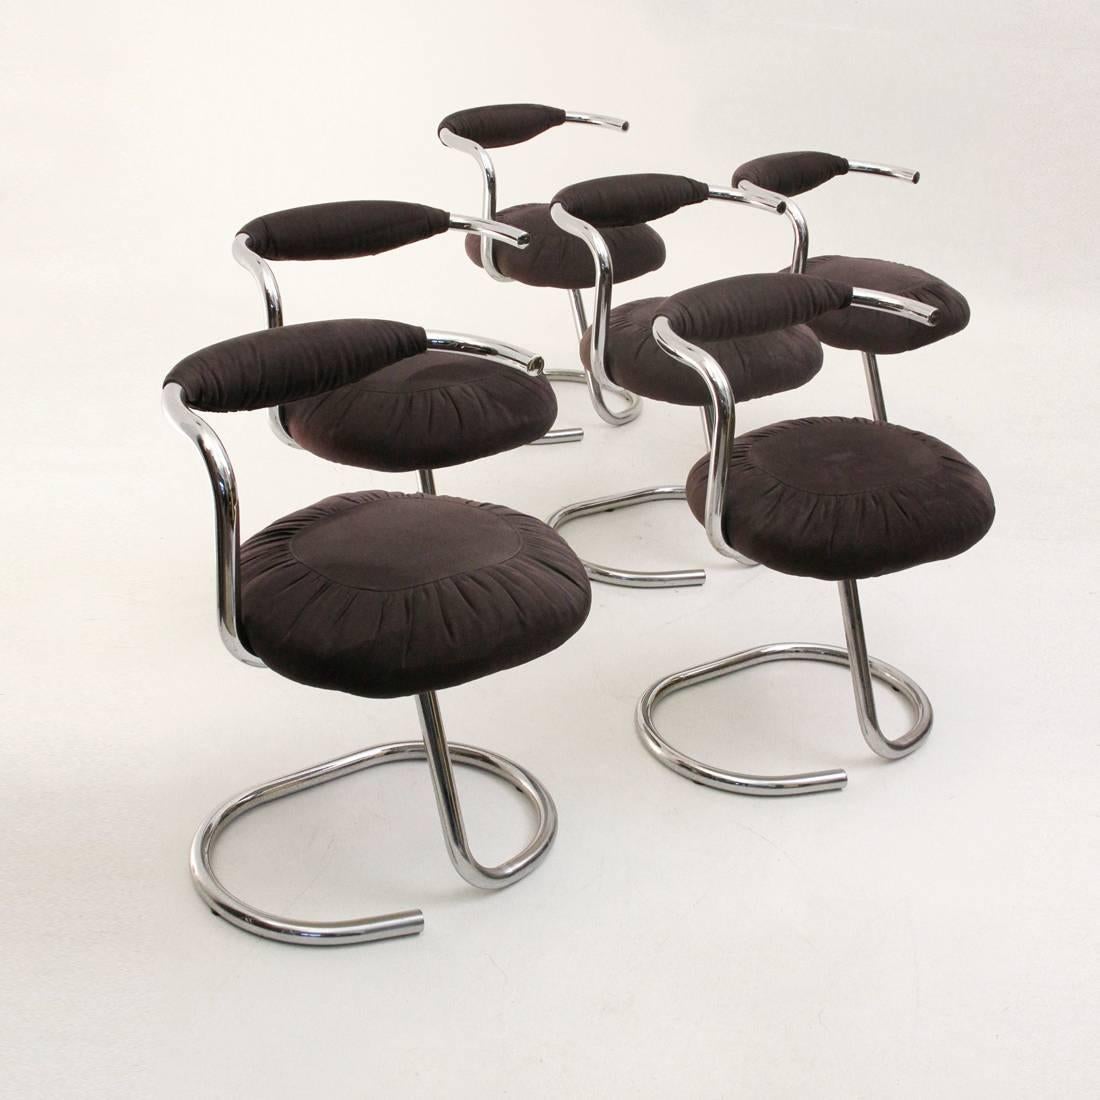 Lot of six chairs designed by Giotto Stoppino in the 1970s.
Chromed tubolar structure with seat and back padded and lined with fabric.
Excellent general condition.

Dimensions: Width 54 cm, depth 54 cm, height 75 cm, seat height 50 cm.